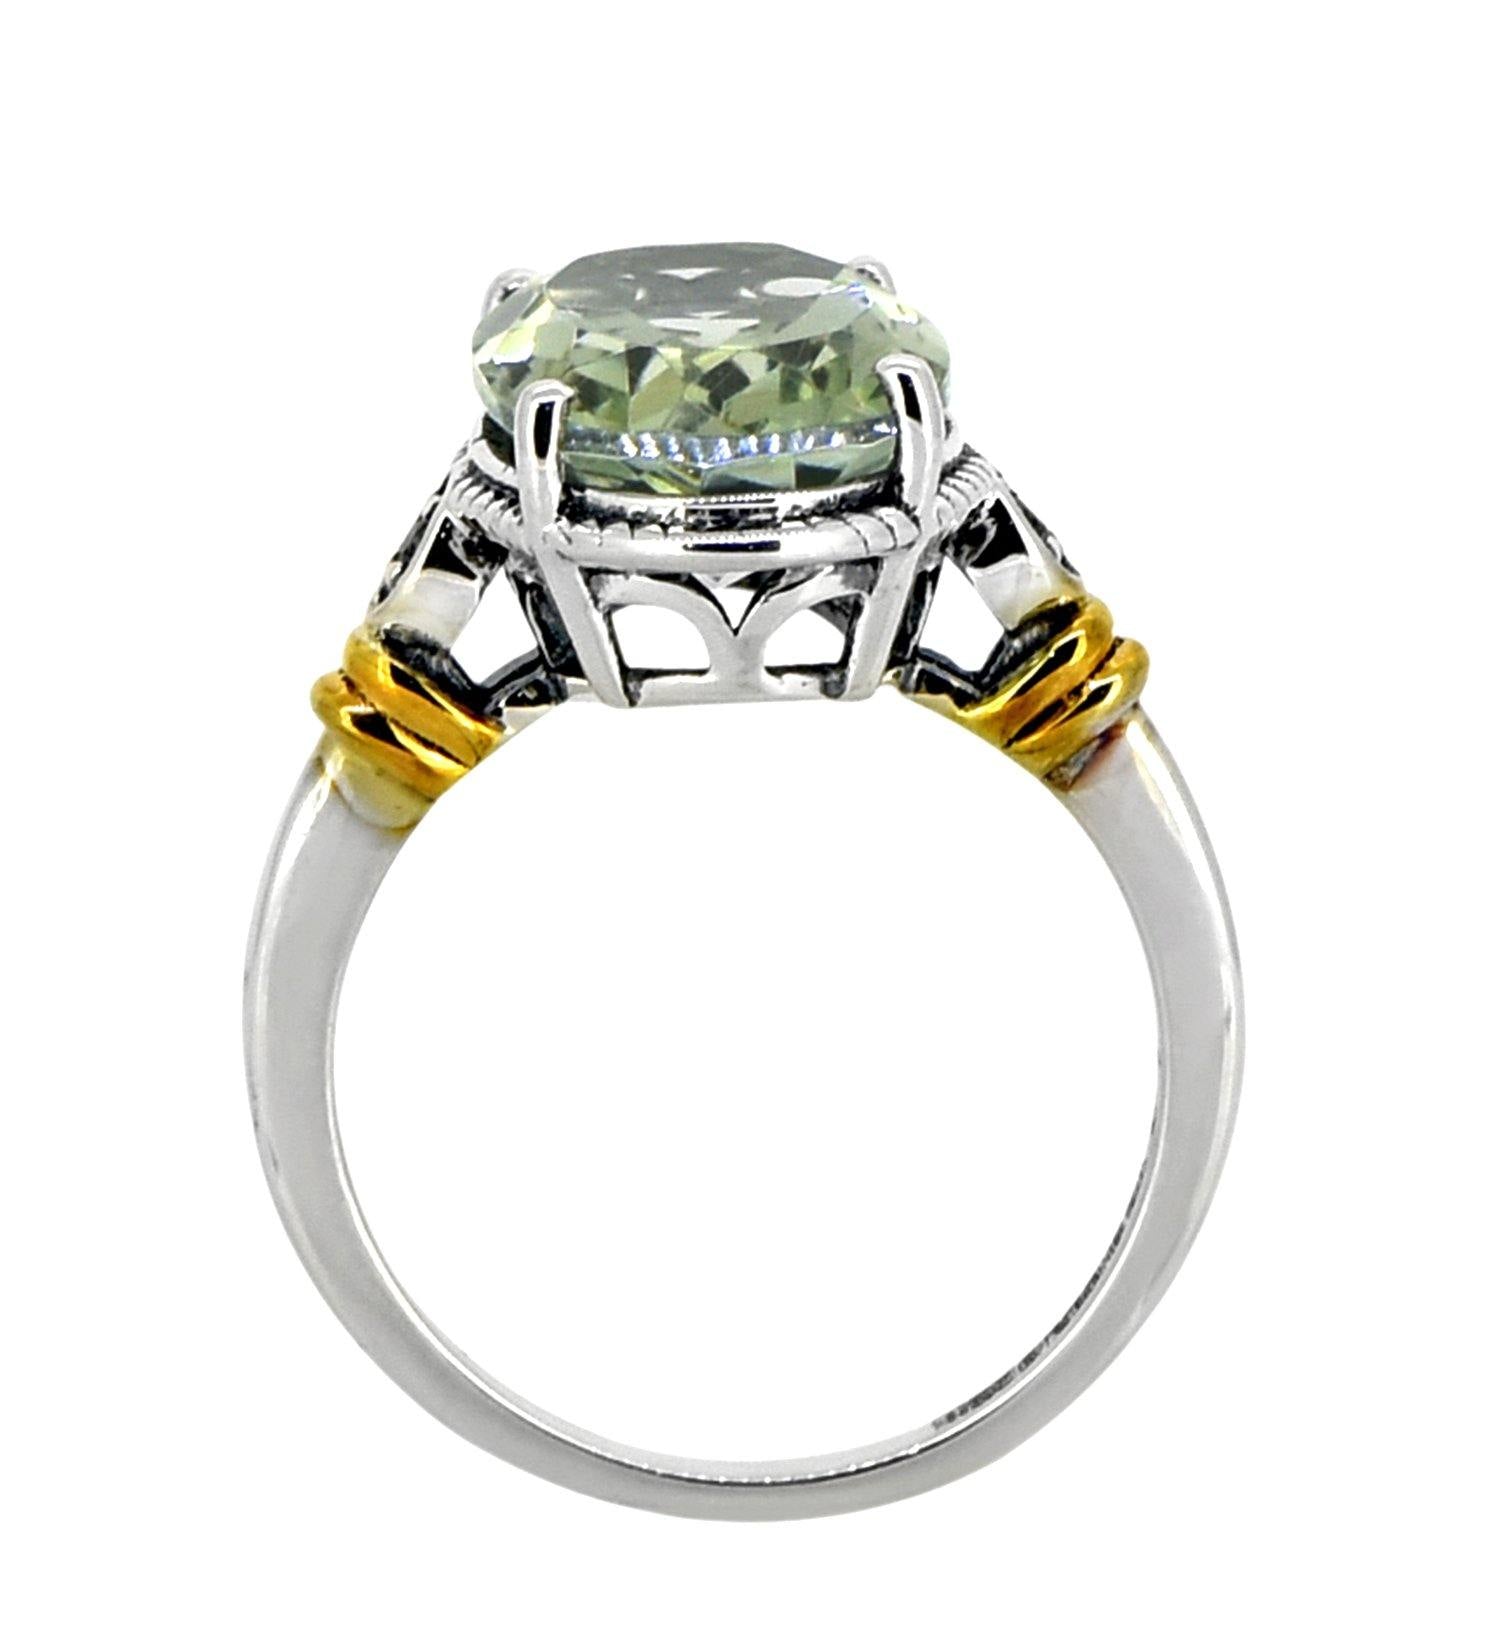 Green Amethyst White Topaz Solid 925 Sterling Silver Gold Plated Ring Gemstone Jewelry - YoTreasure